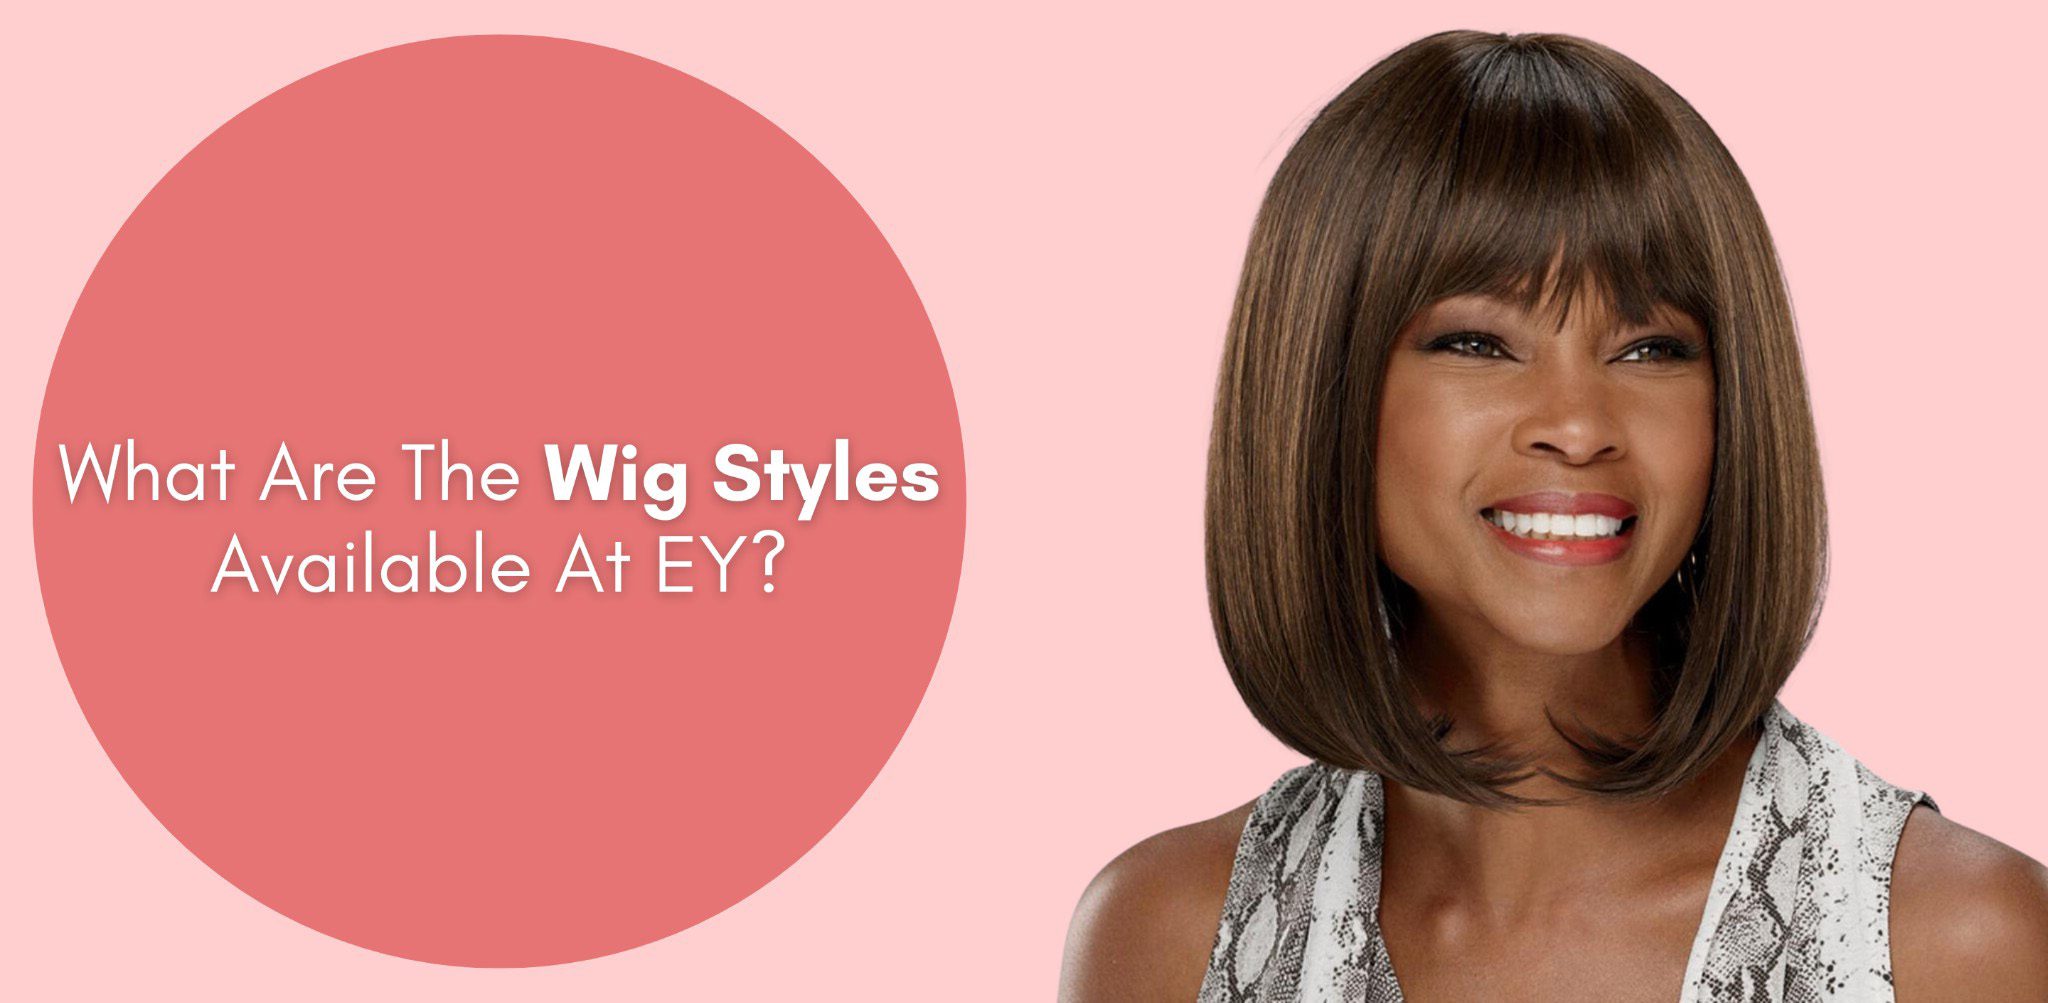 what are the wig styles available at EY